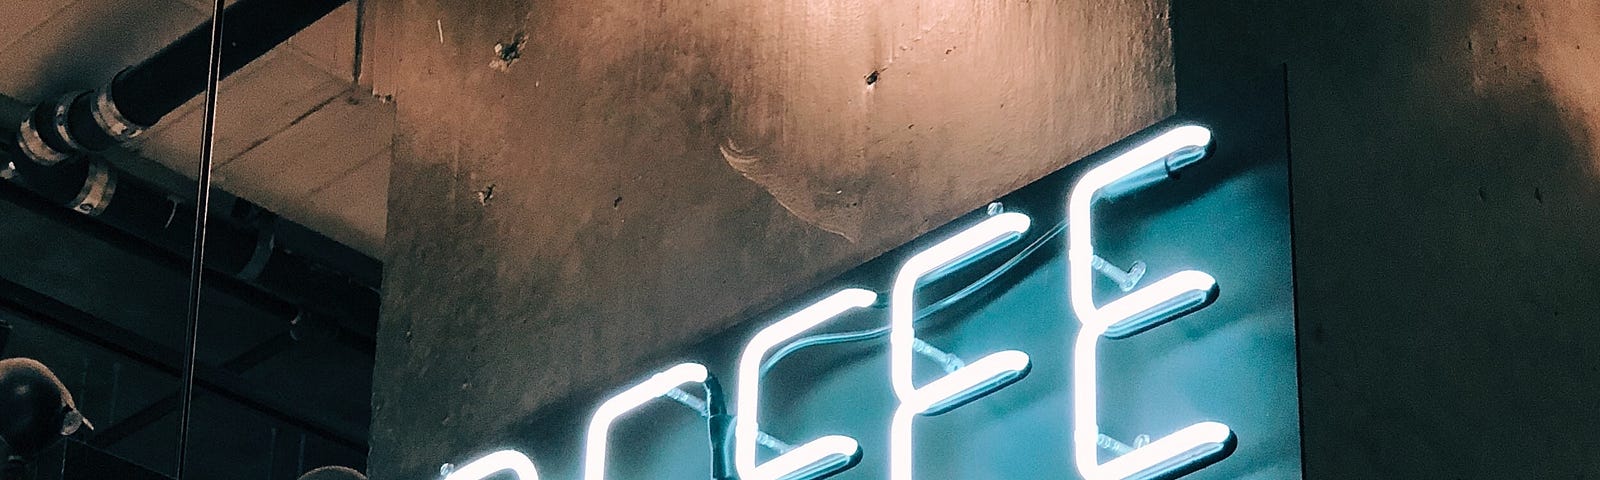 Neon florescent white color words spelling out COFFEE upon a metal blue sheet ; all held up against a large, thick wood beam for some kind of reasturant